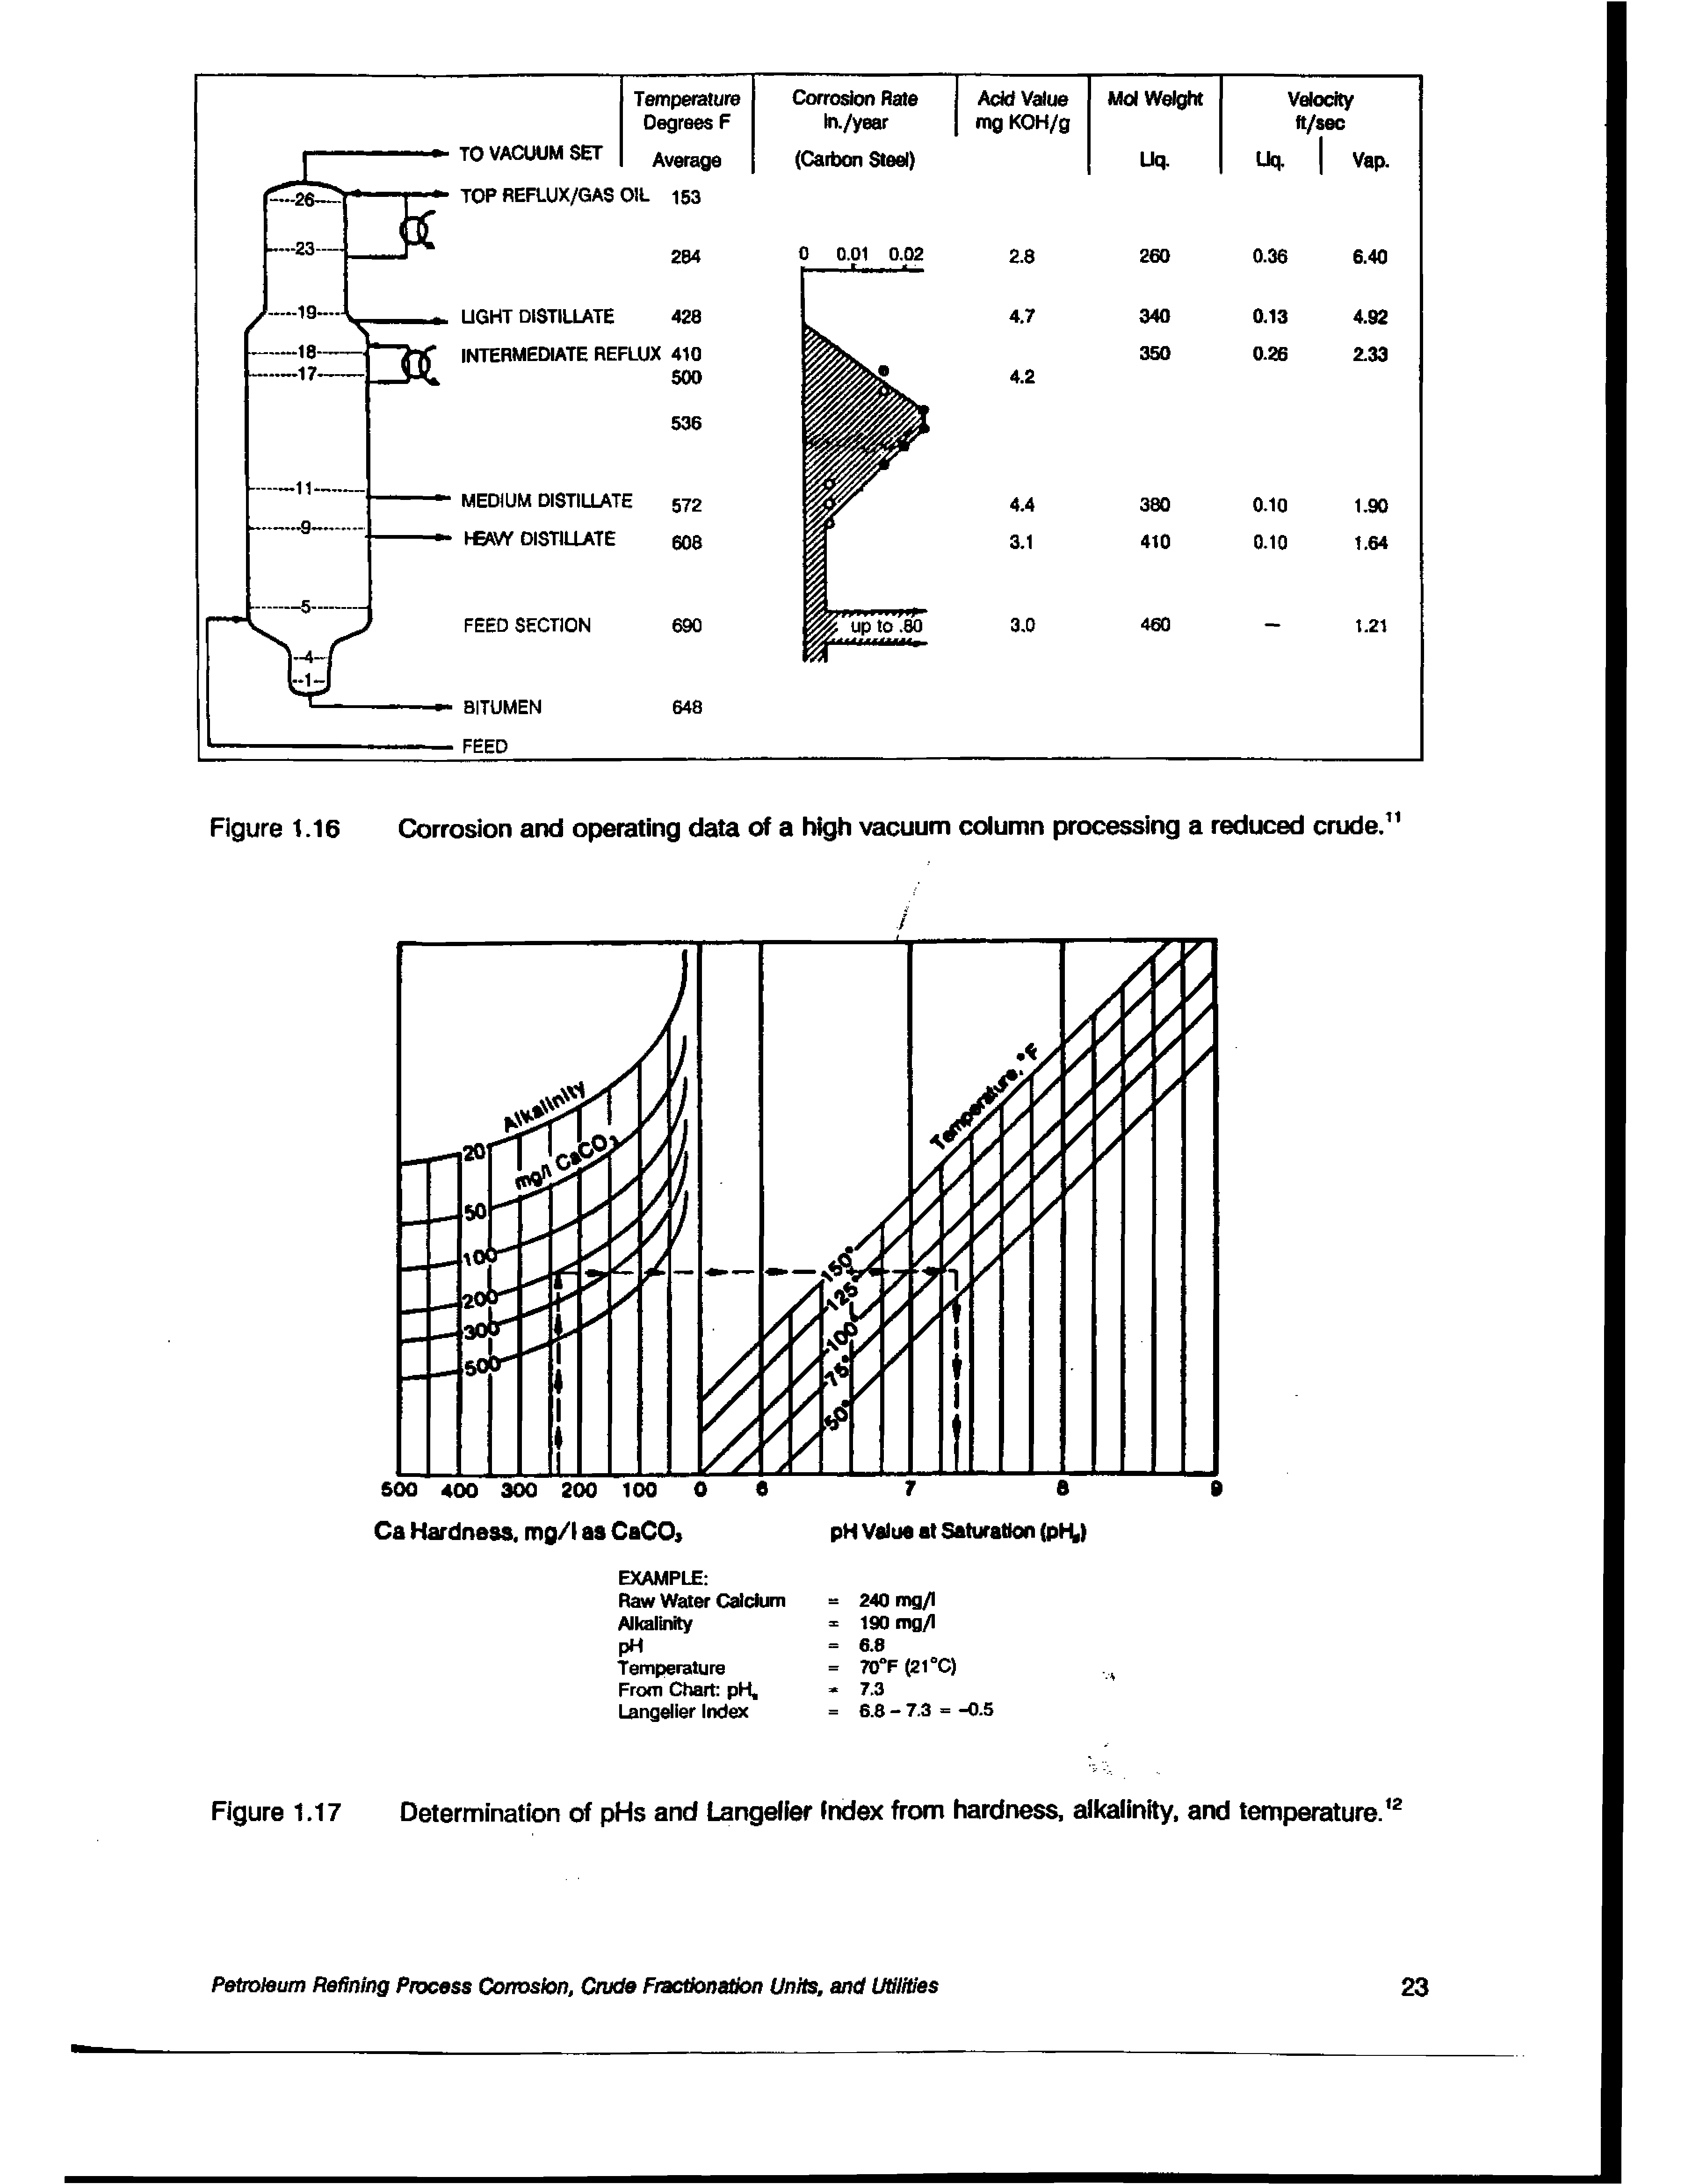 Figure 1.17 Determination of pHs and Langelier Index from hardness, alkalinity, and temperature.12...